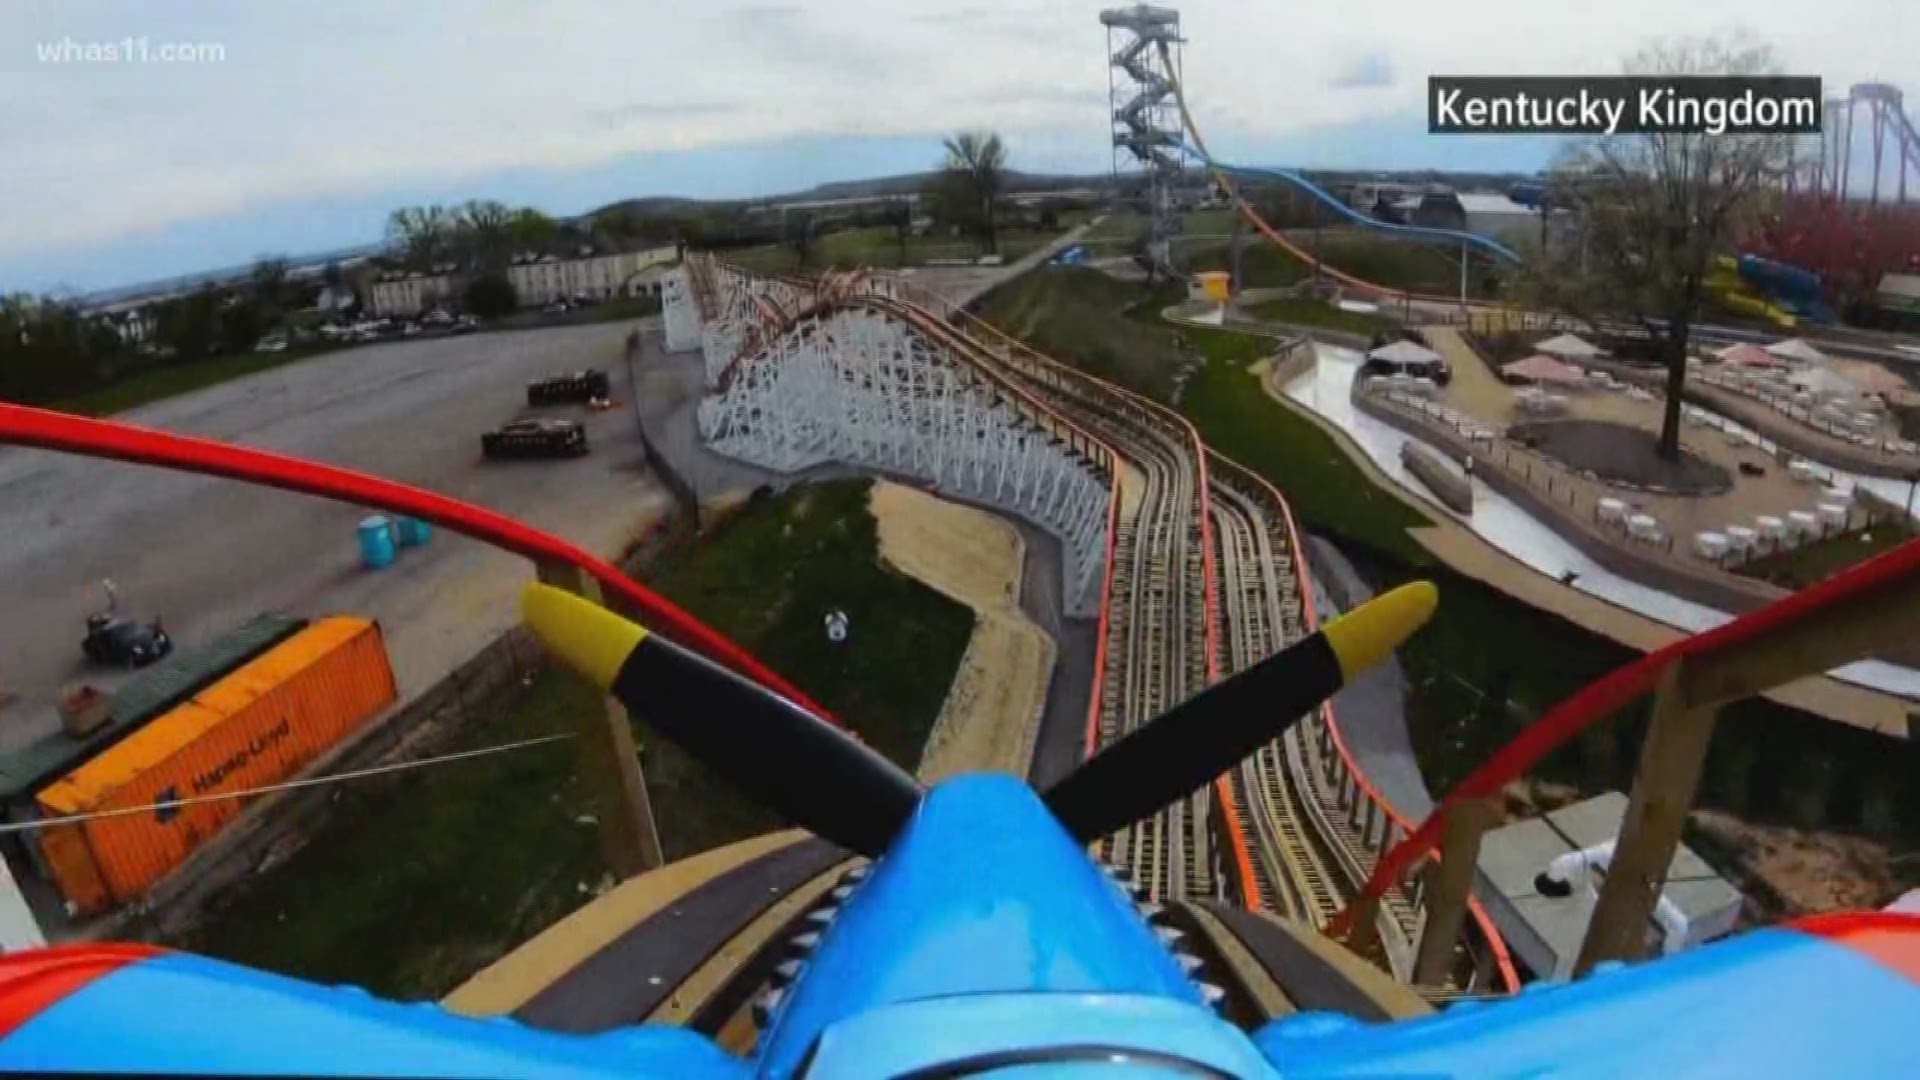 It's been months in the making, and today's the day. 
We're getting our first look at Kentucky Kingdom's newest roller coaster, the Kentucky Flyer.